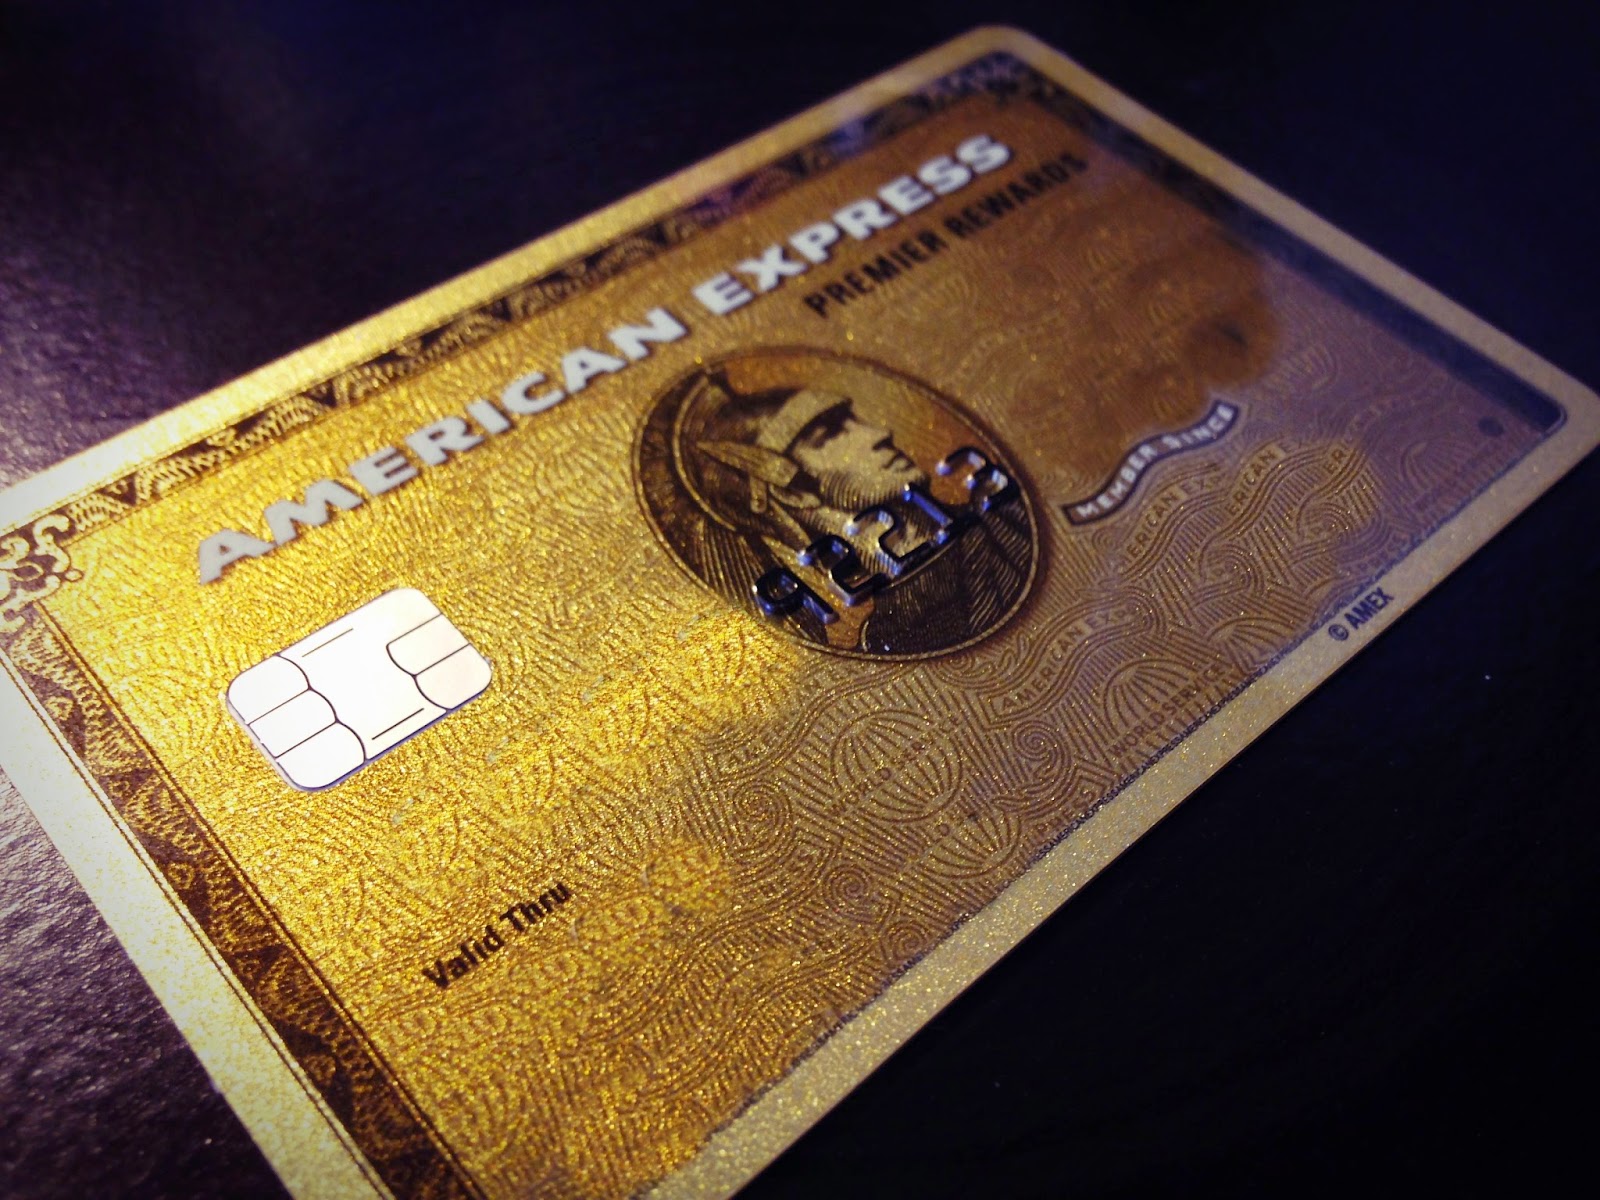 Credit Card Review: American Express Premier Rewards Gold Card